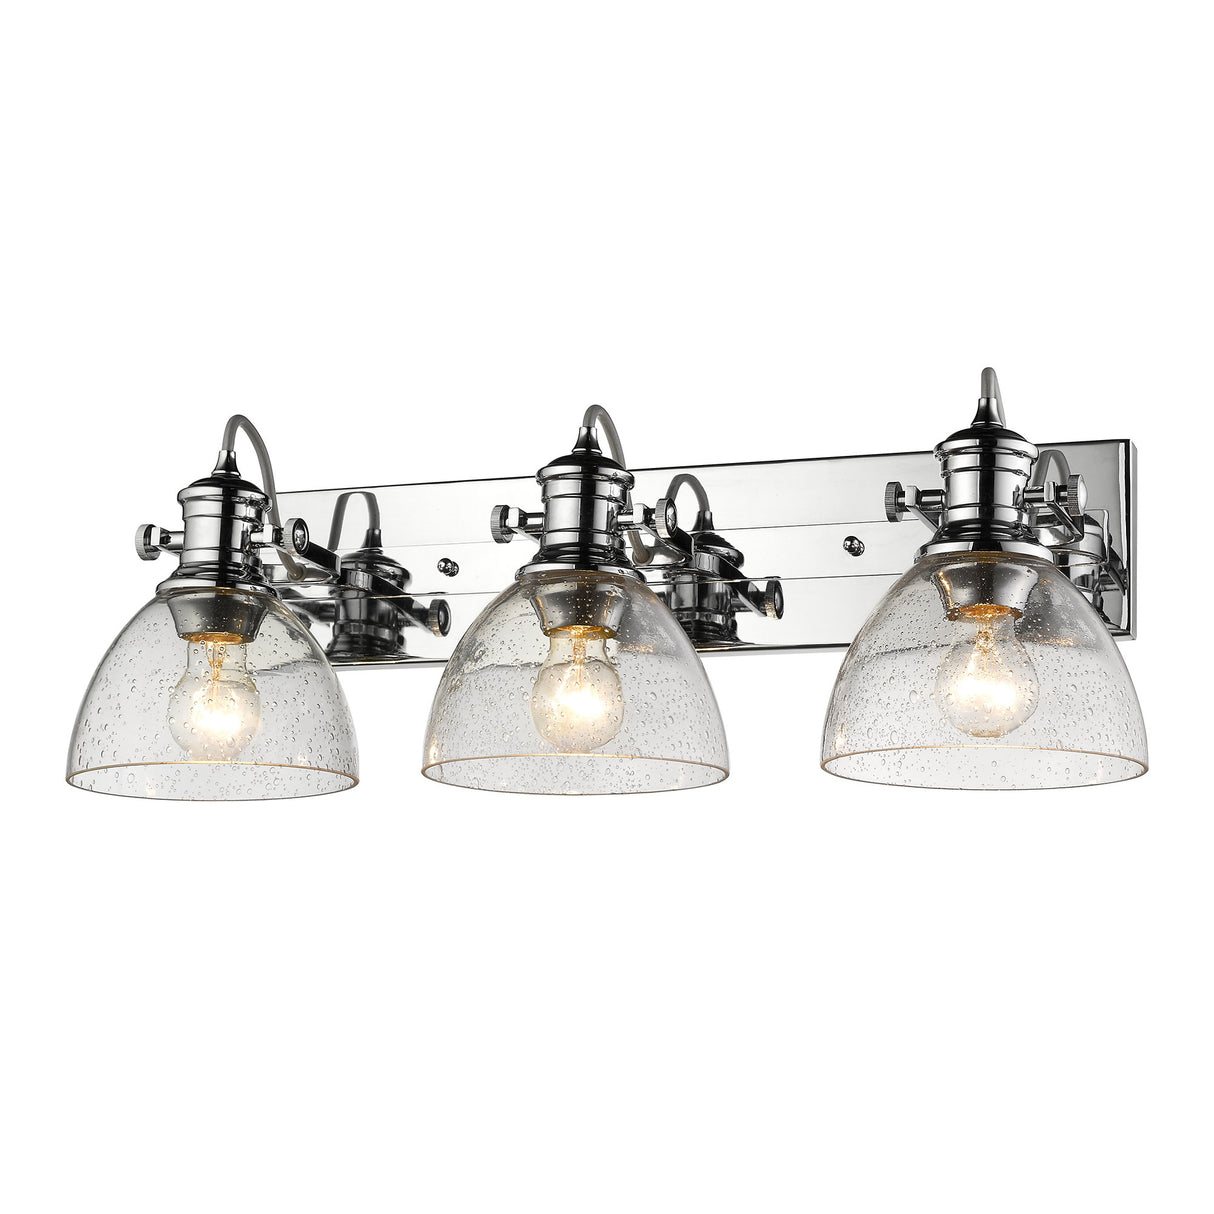 Hines 3-Light Semi-Flush in Chrome with Seeded Glass